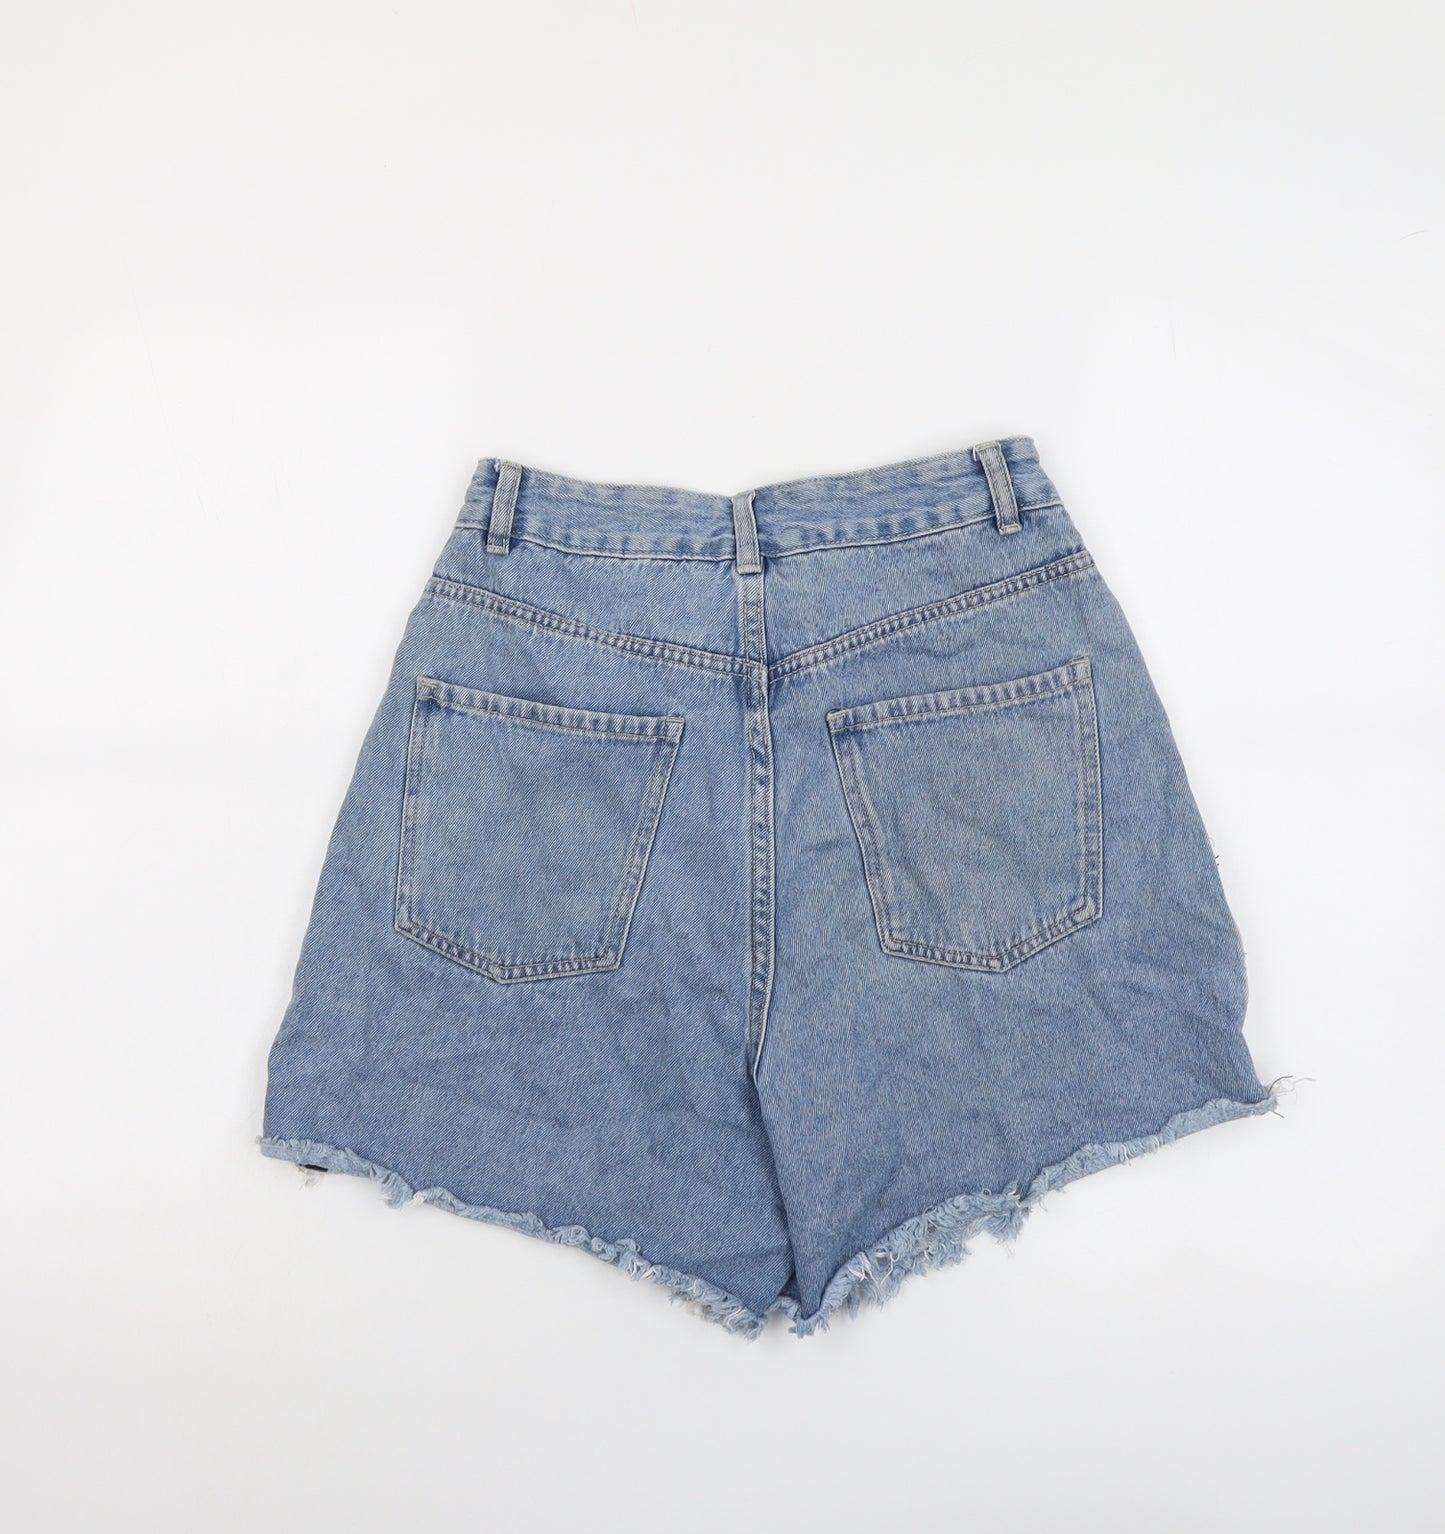 Cotton On Womens Blue Cotton Cut-Off Shorts Size 10 L4 in Regular Button